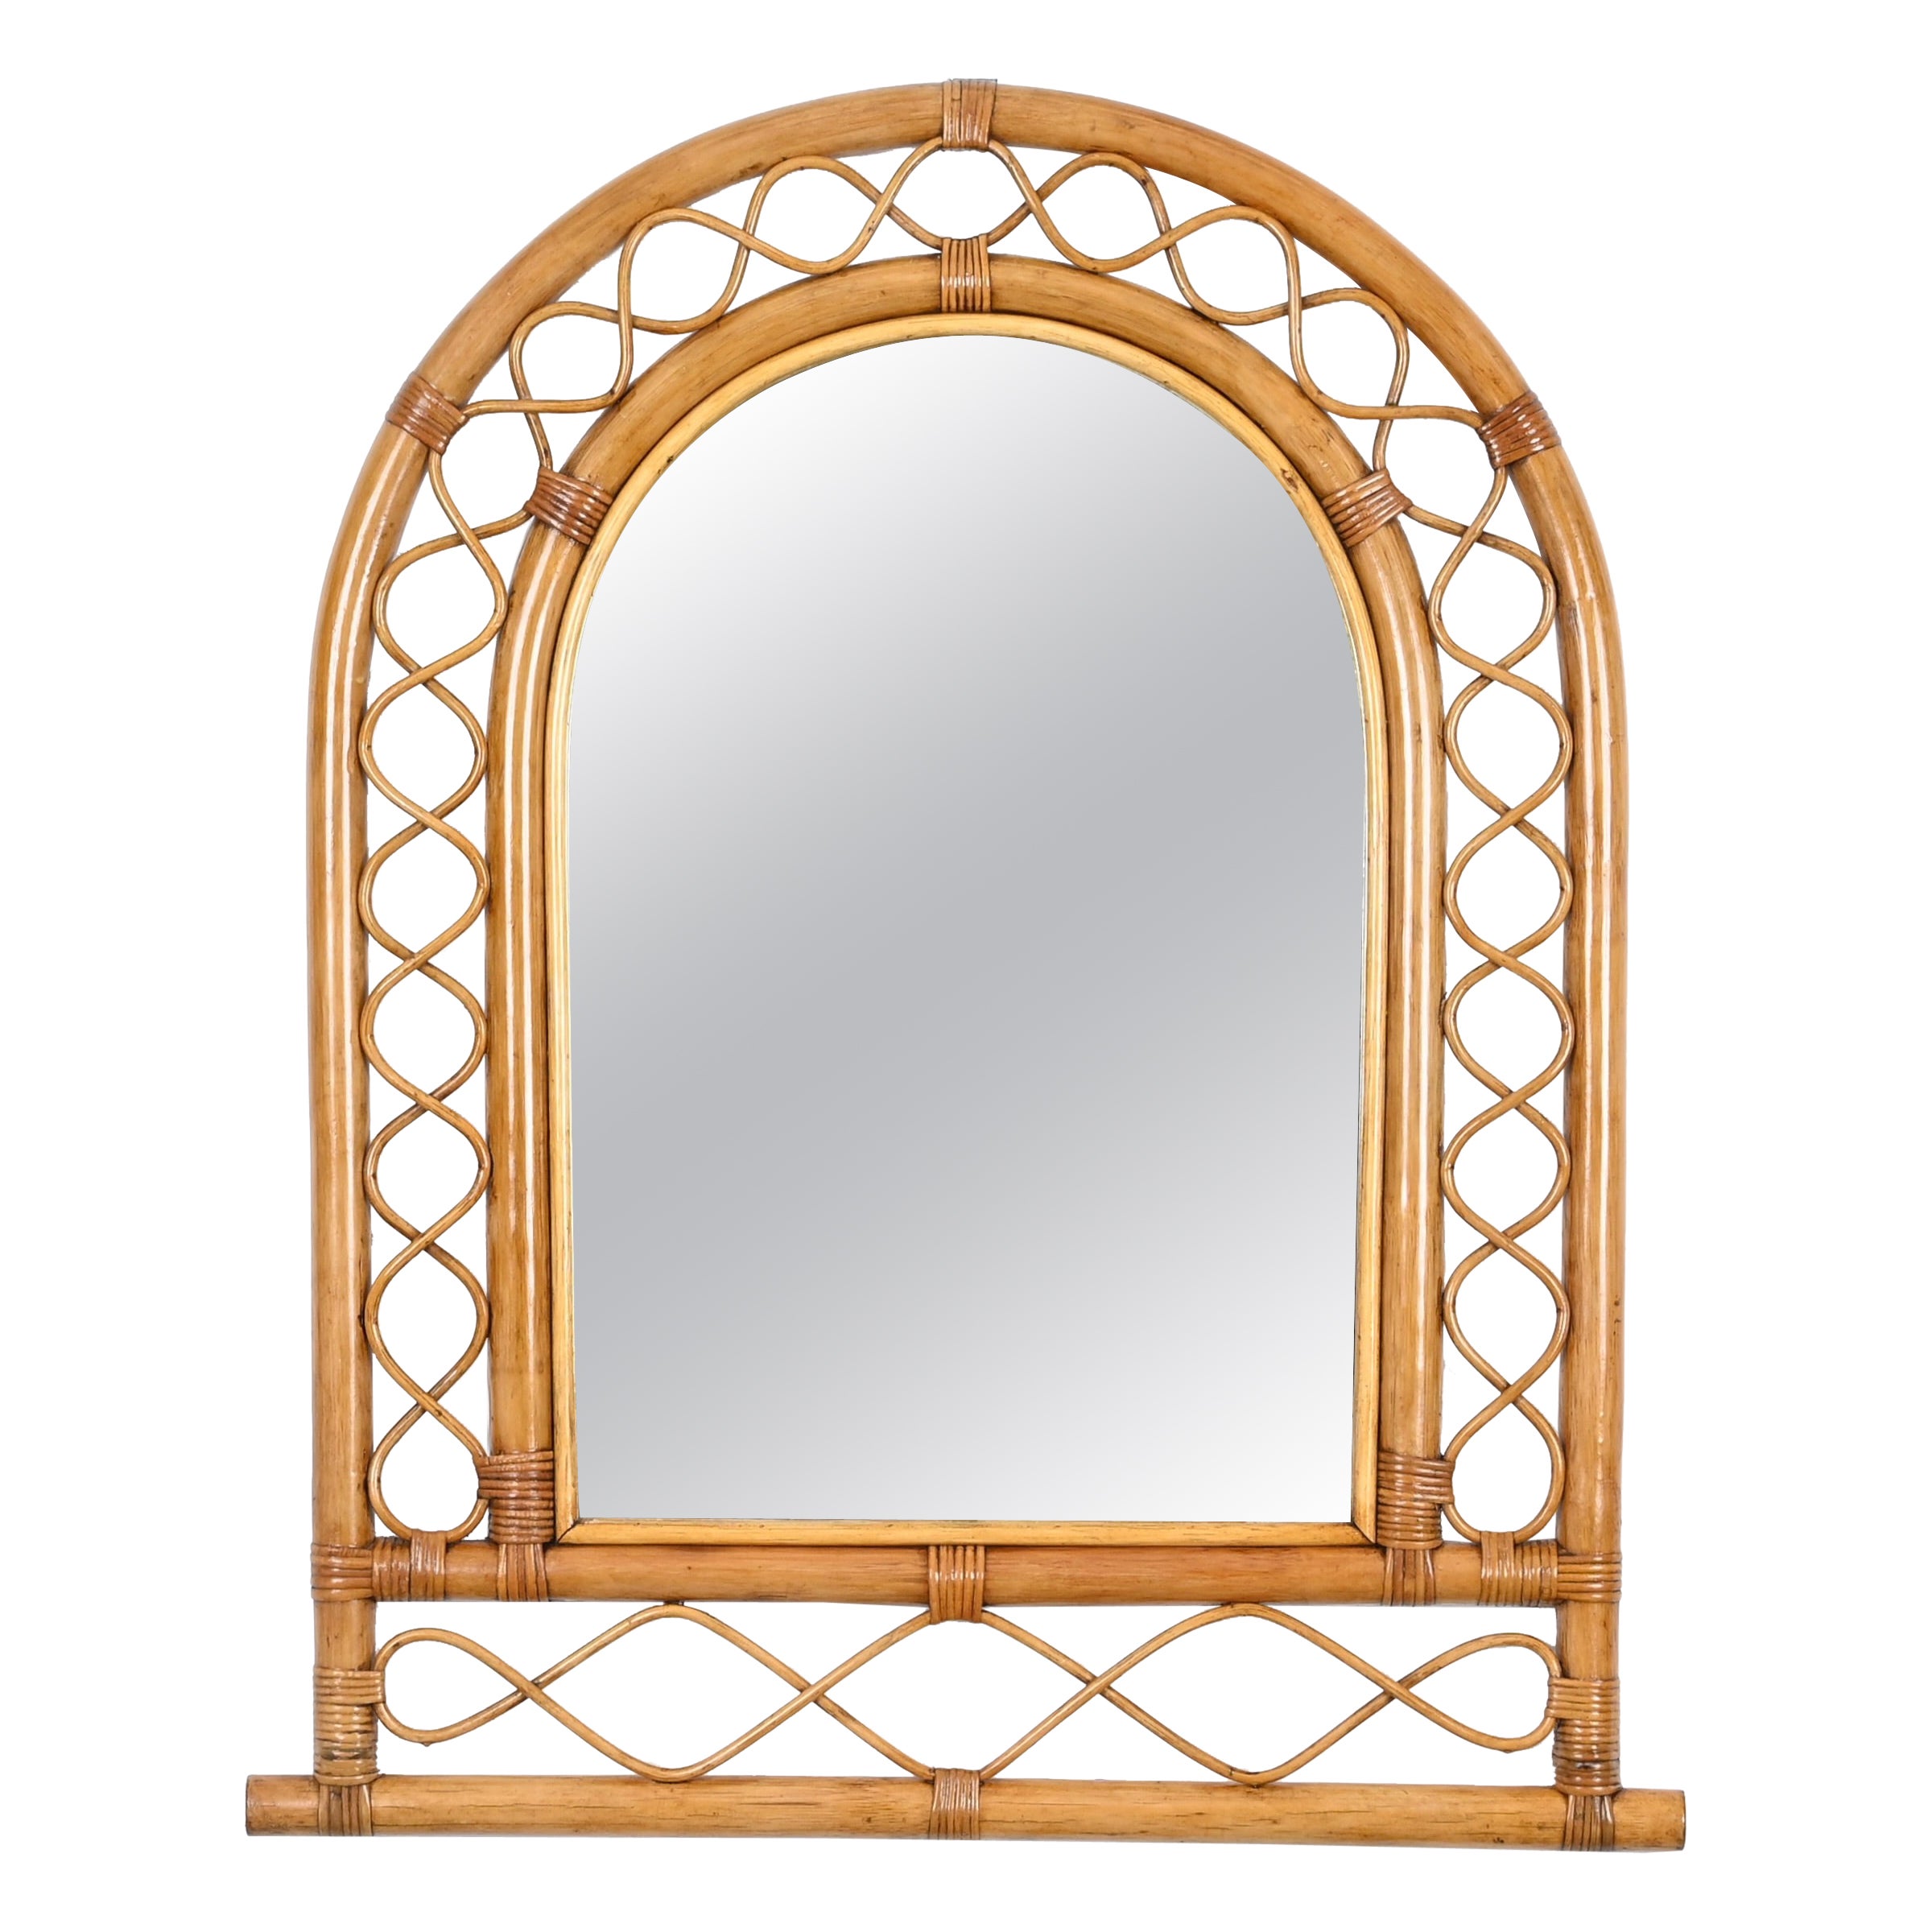 French Riviera Arch Mirror in Rattan, Wicker and Bamboo, Italy 1960s For Sale